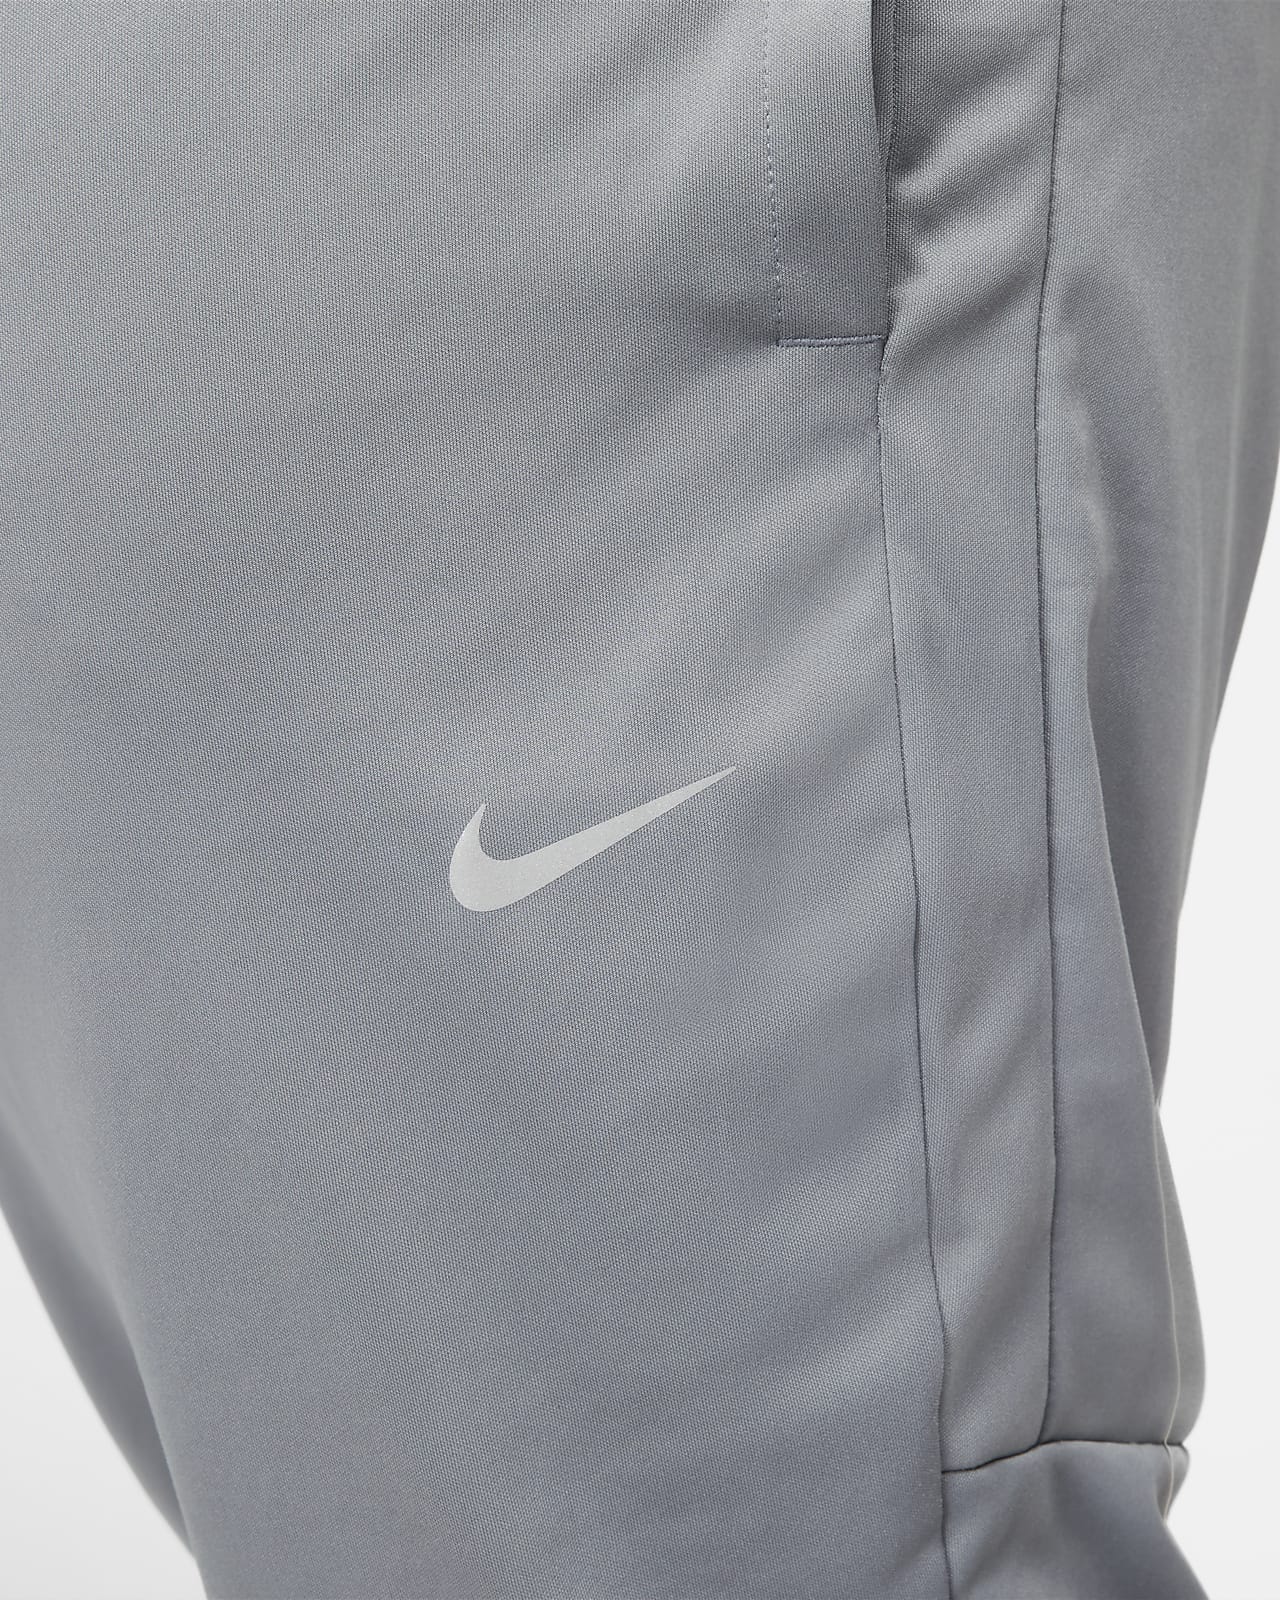 Nike Running Challenger Dri-FIT knitted sweatpants in black - BLACK